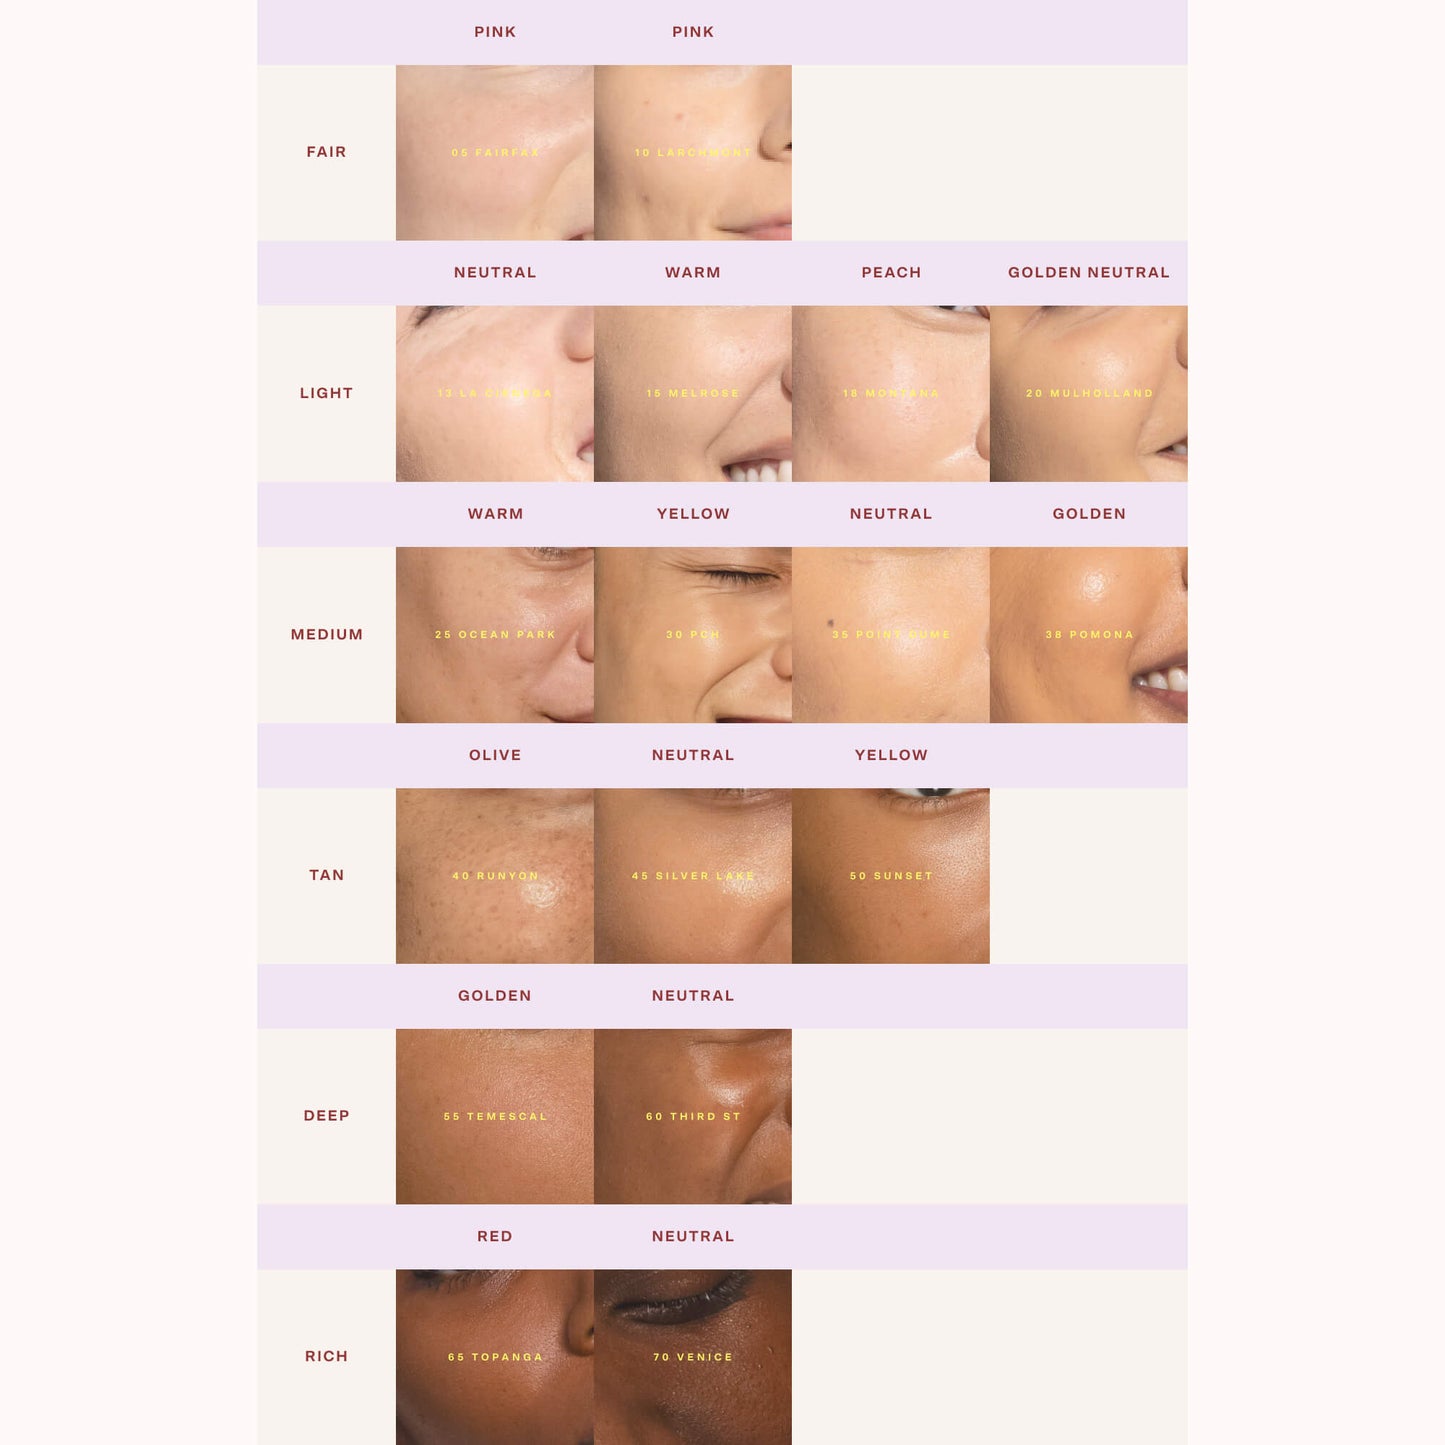 [Shared: Shade match chart showing the undertones of Tower 28 Beauty SunnyDays SPF 30 Tinted Sunscreen shades]